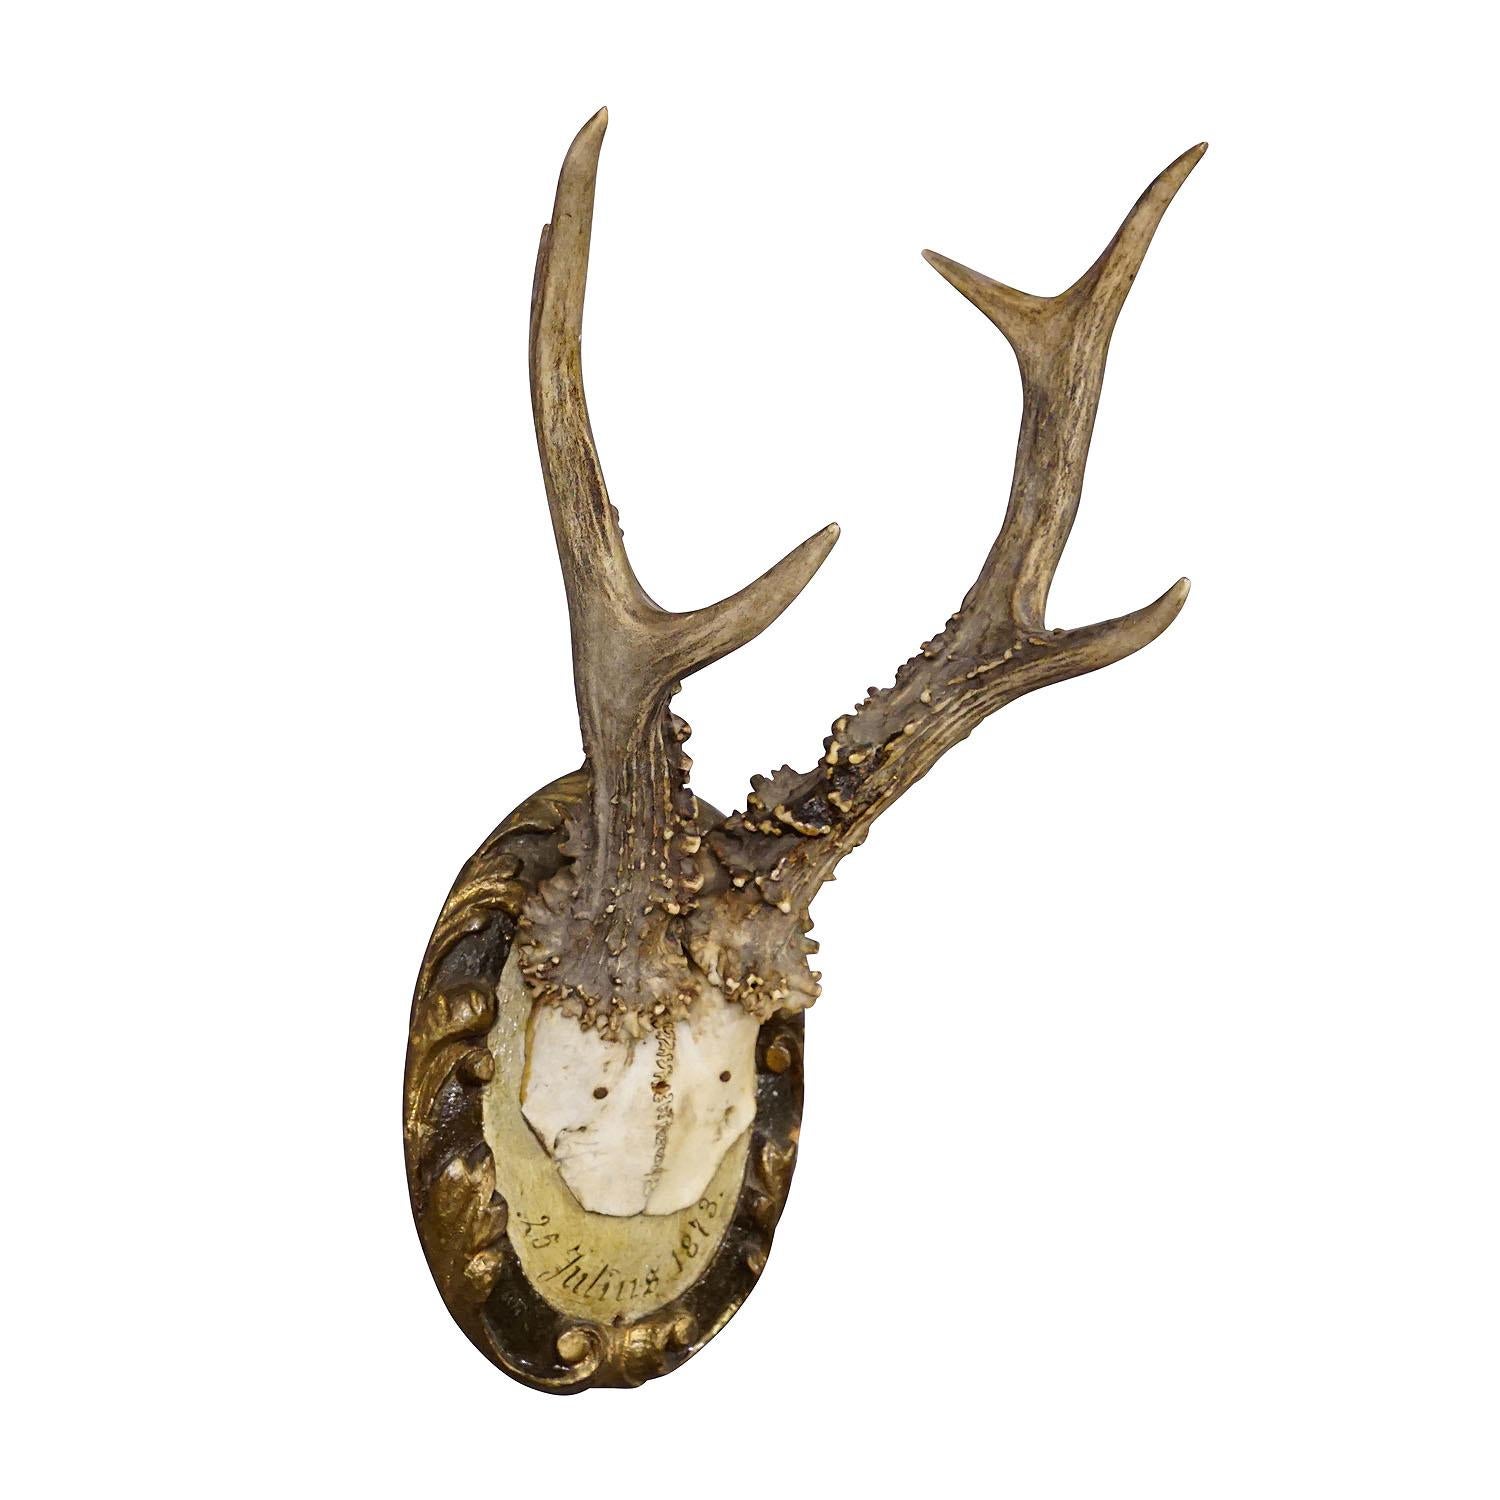 Antique Black Forest Roe Deer Trophy on Wooden Plaque 1873

A great 6 pointer roe deer (Capreolus capreolus) trophy from the Black Forest shot in Germany in 1873. The antlers are mounted on a carved wall plaque with painted finish and handwritten